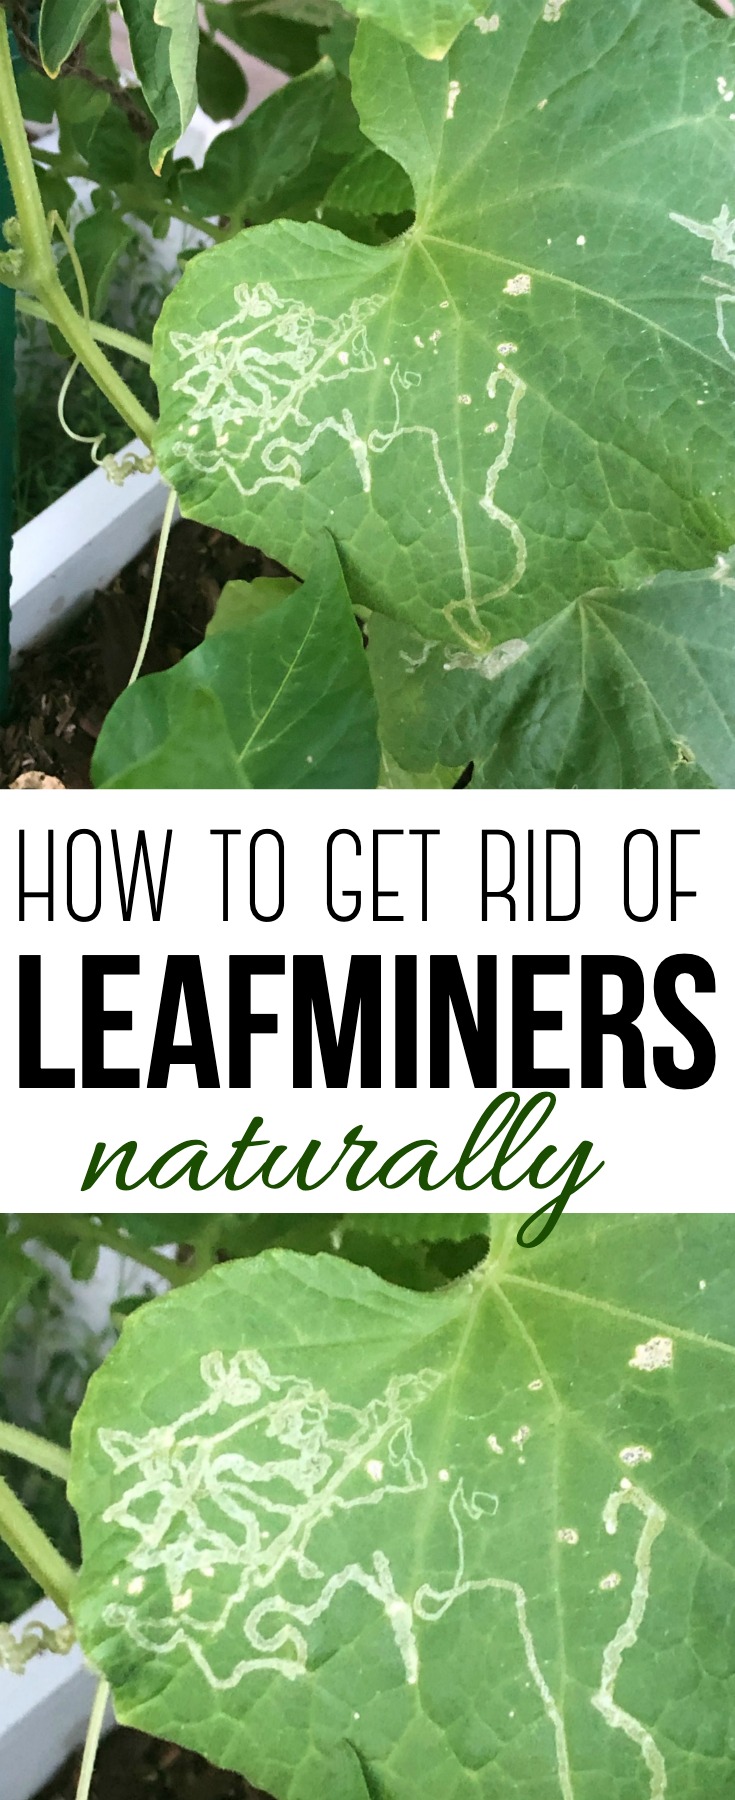 Thin, whitish trails on leaves are a sign of leafminers. Thankfully there are many ways to get rid of leafminers naturally without resorting to pesticides. #leafminer #gardening #natural #pestcontrol